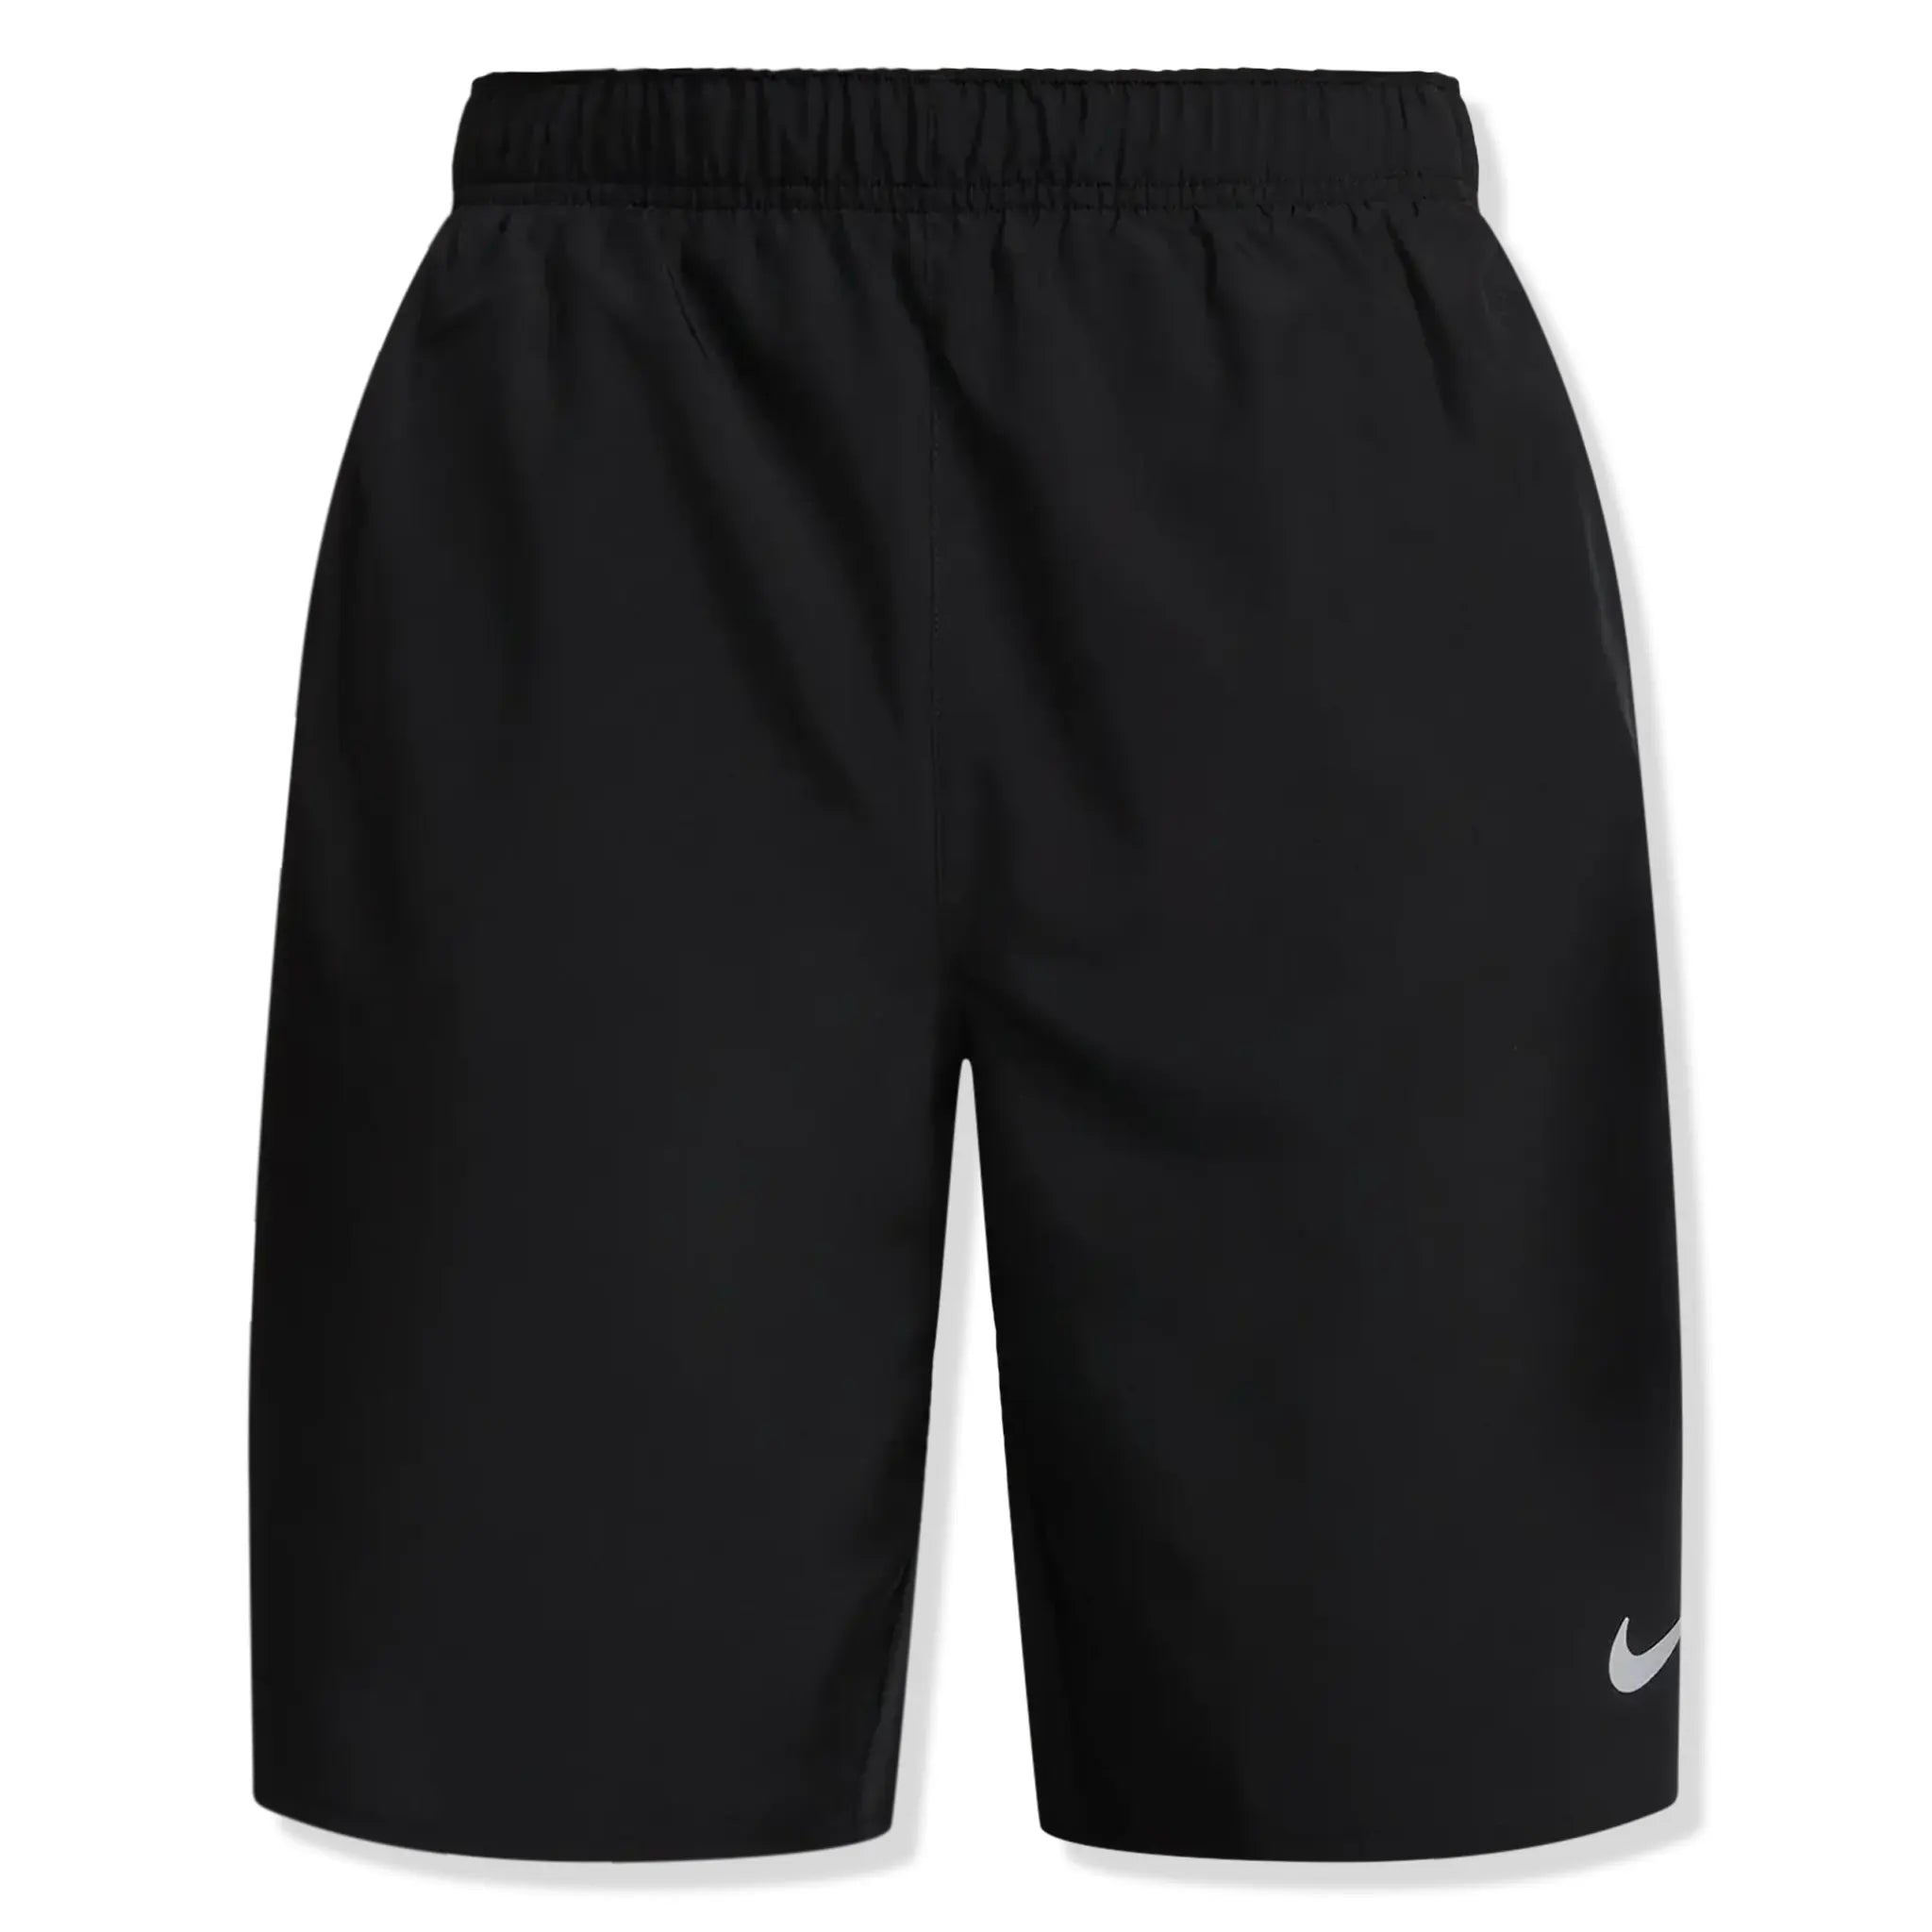 Front view of Nike Challenger 7-Inch Black Shorts CZ9067-010